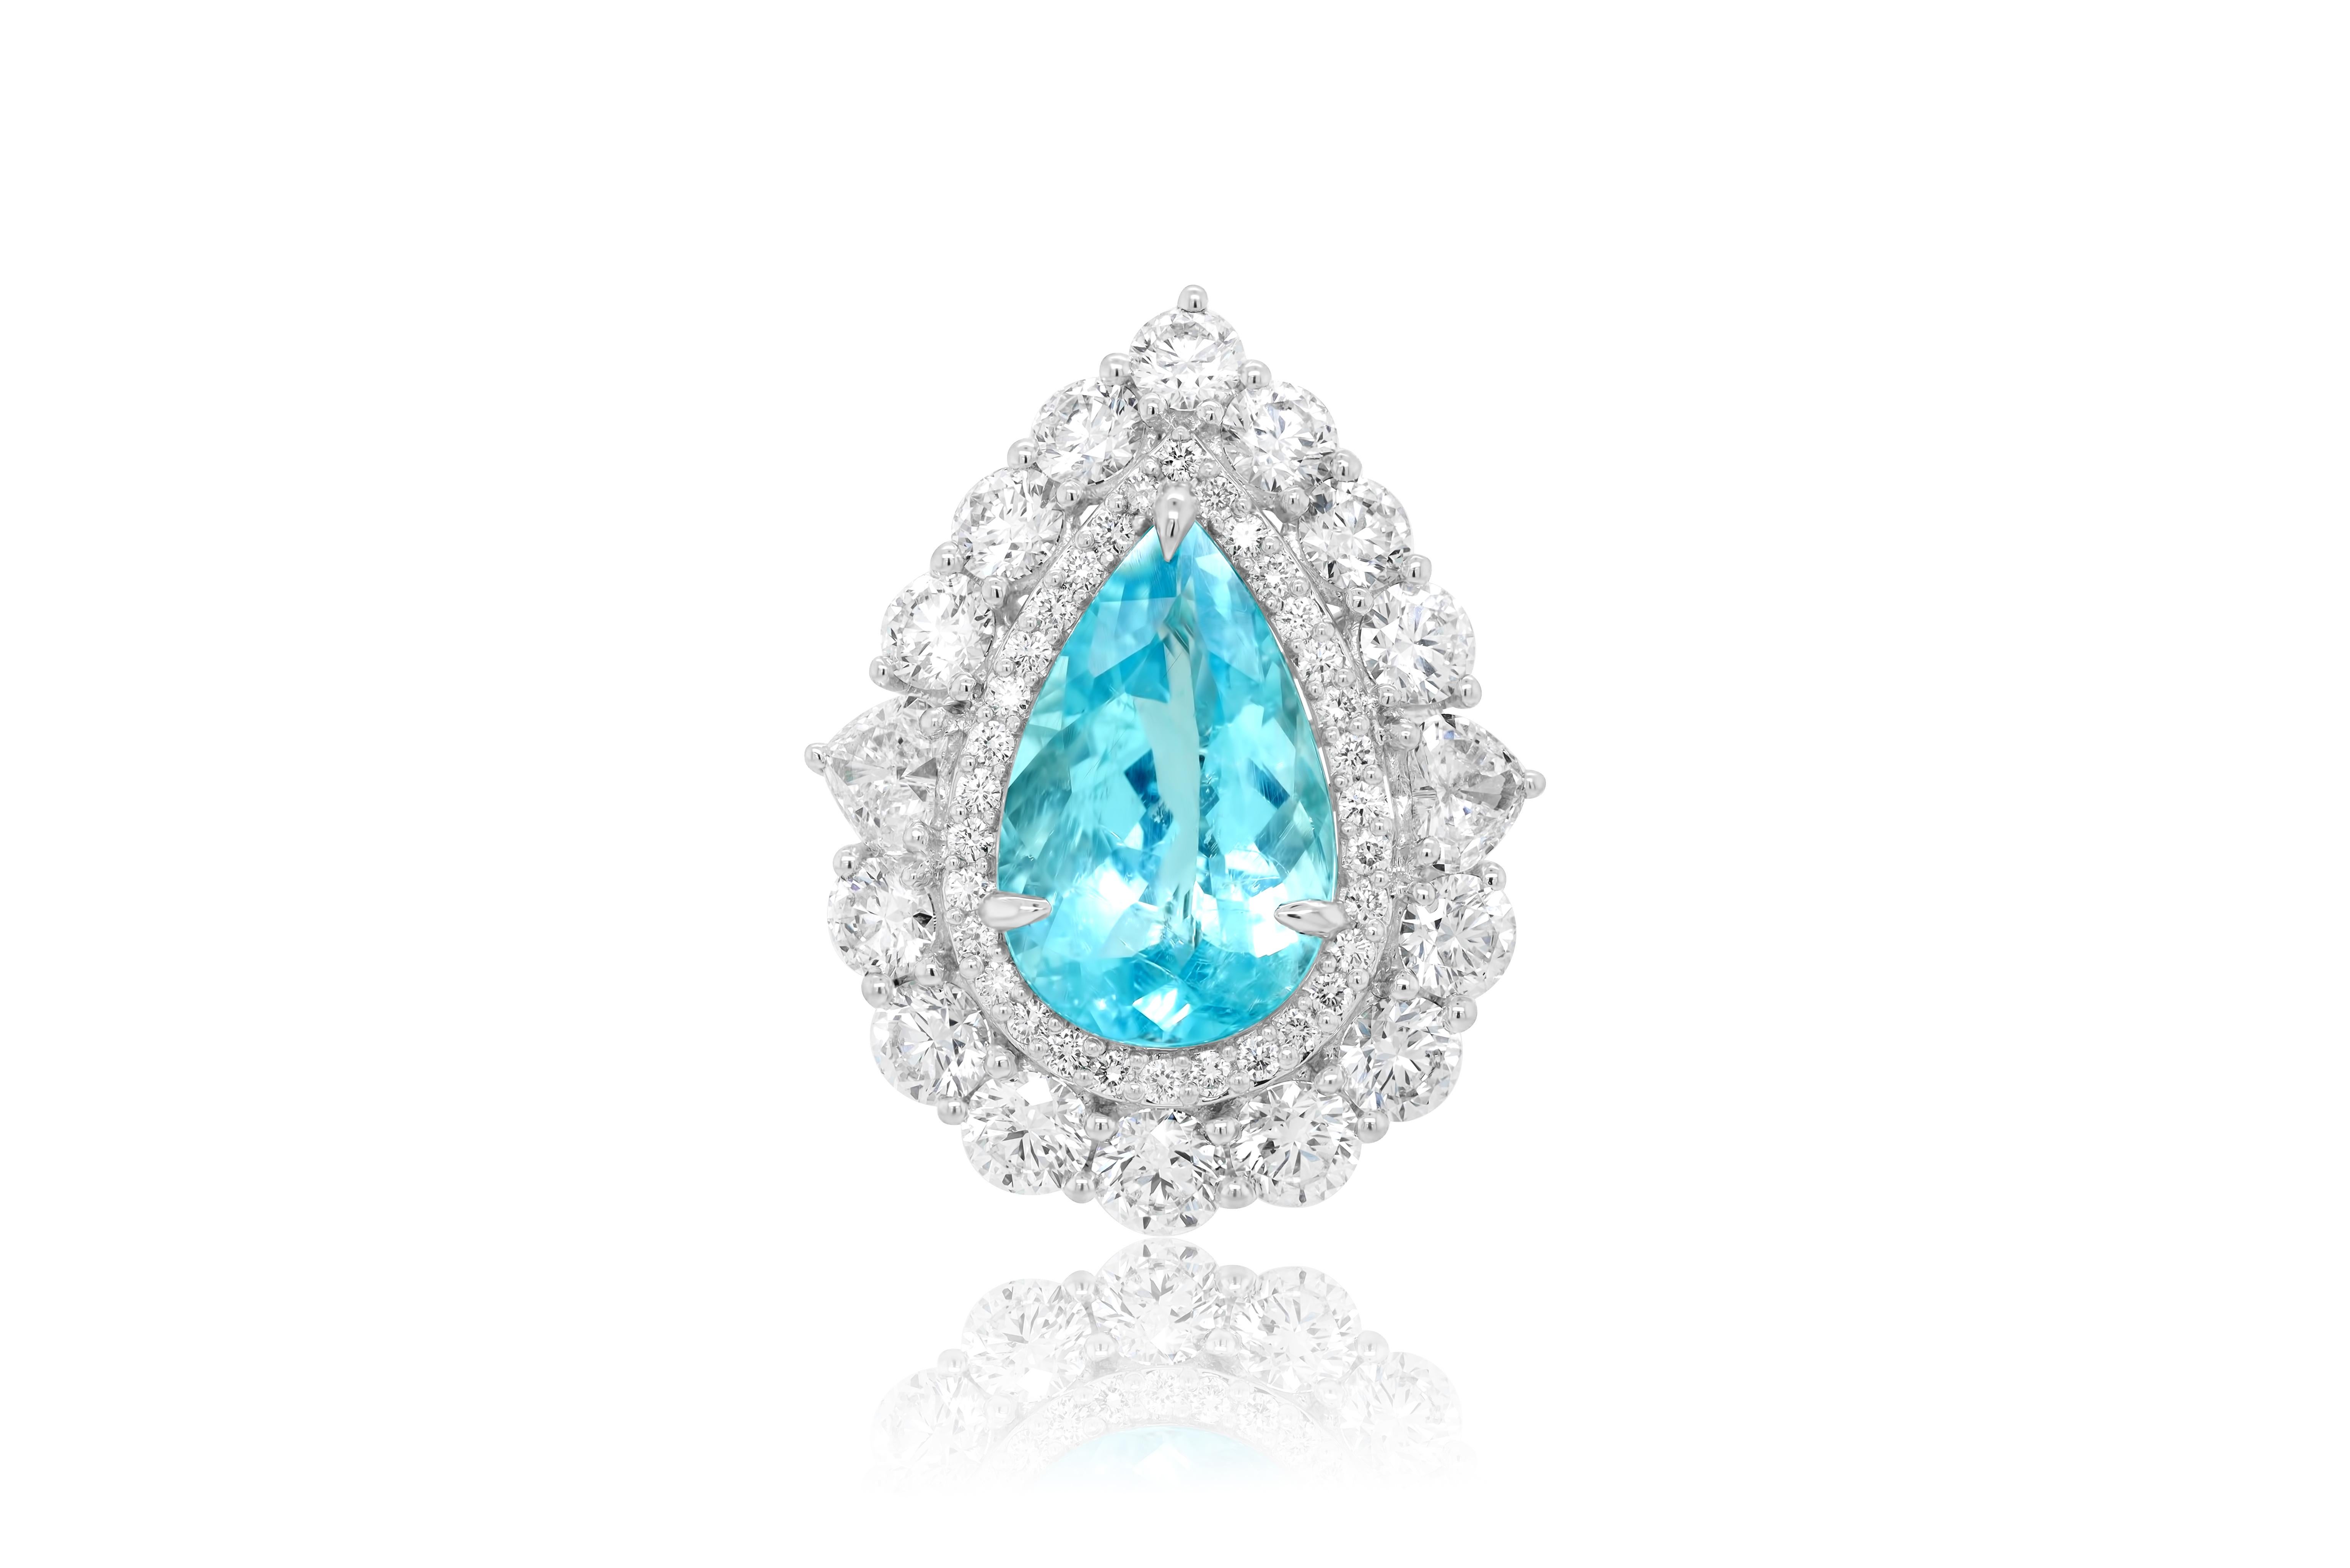 Platinum Paraiba pendant and diamond ring (two-in-one) featuring a 9.66 ct pear shaped paraiba surrounded 2 heart shape stones weighing 0.91 cts and 5.70 cts of round diamonds.
Diana M. is a leading supplier of top-quality fine jewelry for over 35